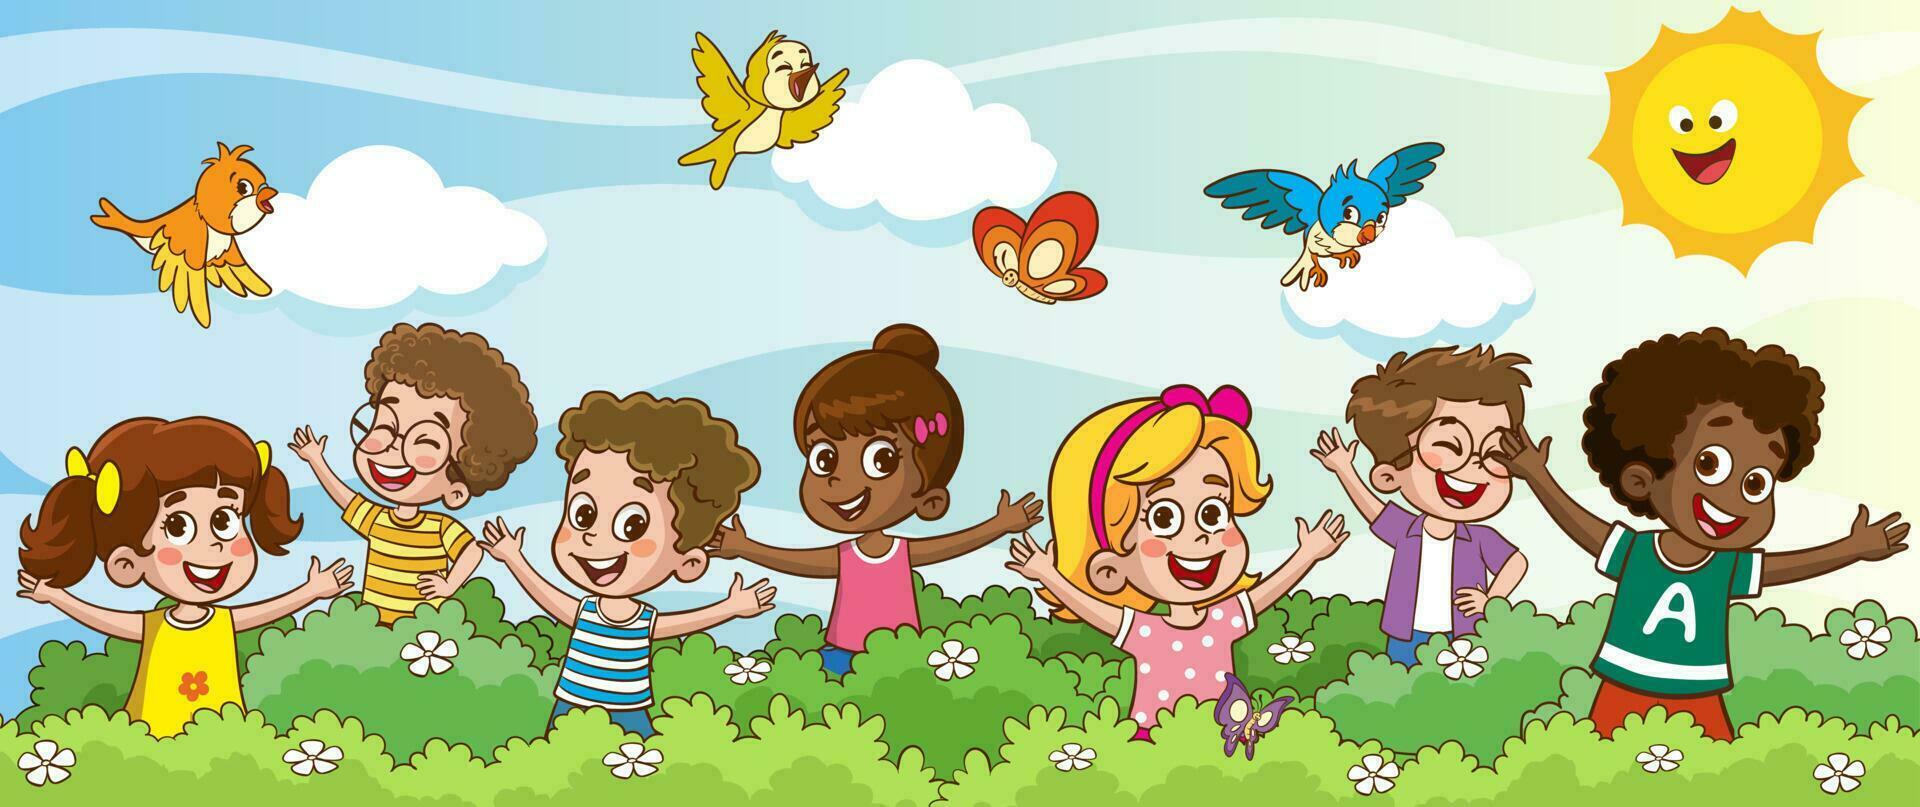 little kid play together with friend and feel happy vector